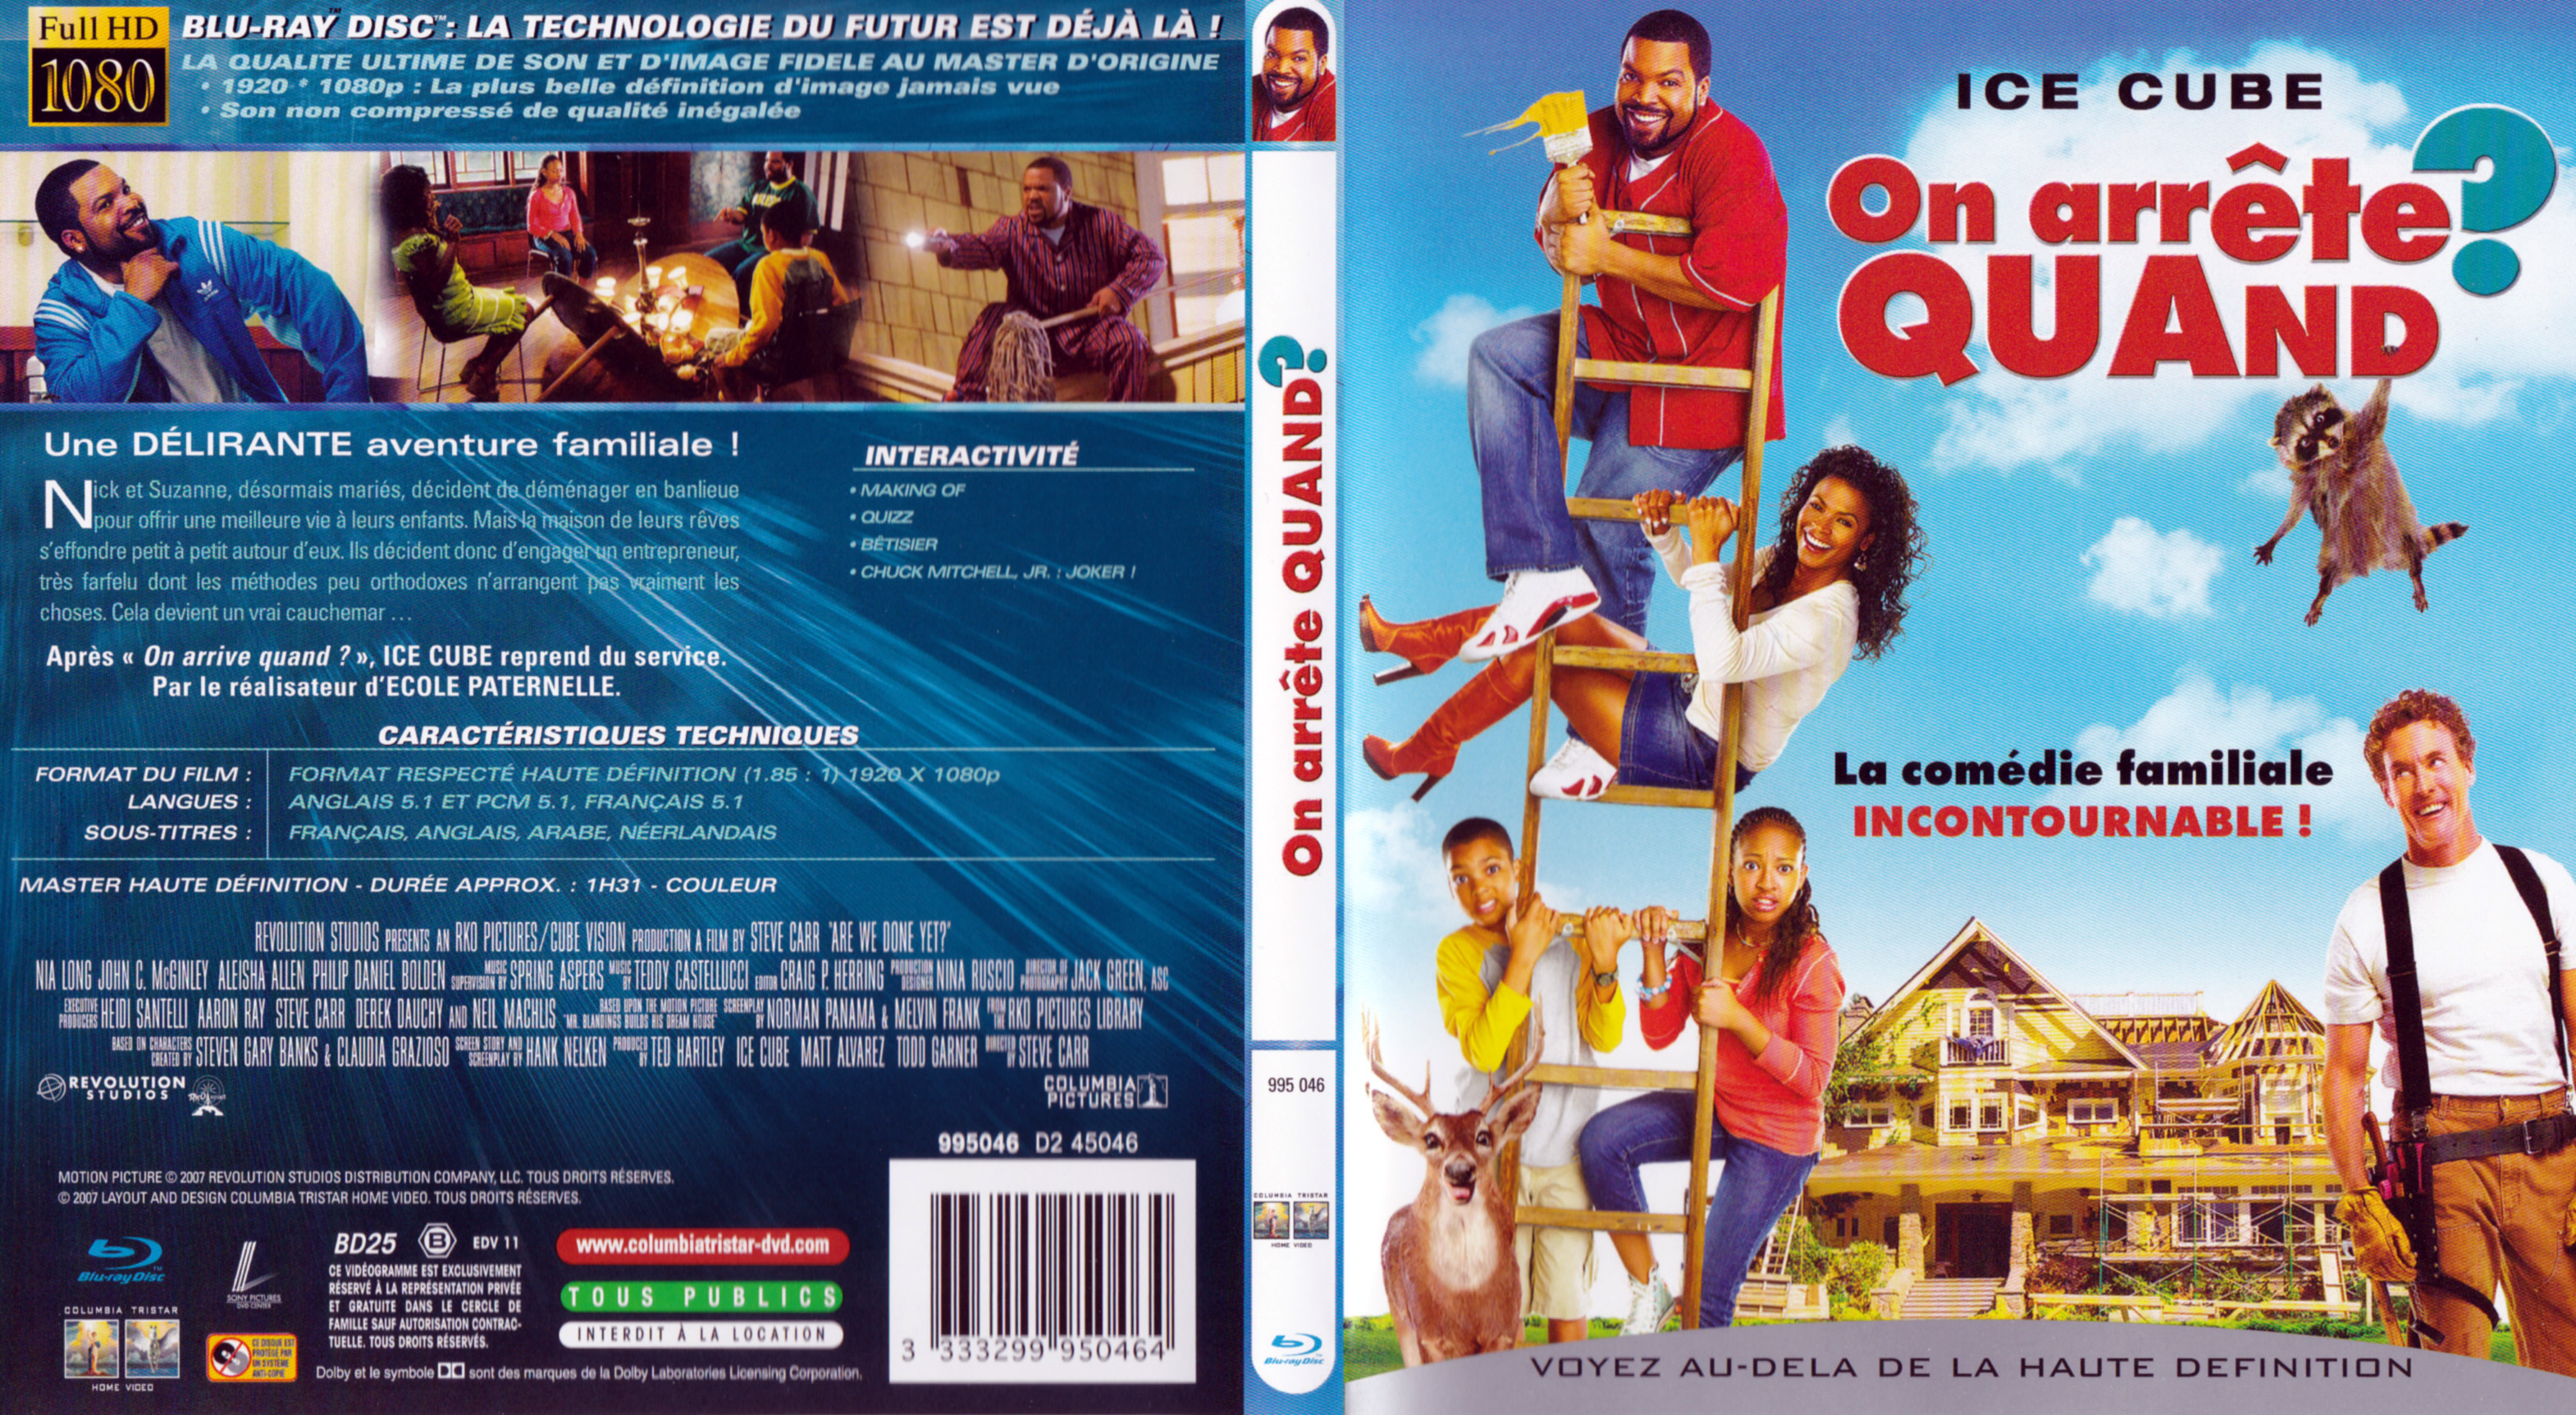 Jaquette DVD On arrte quand (BLU-RAY)